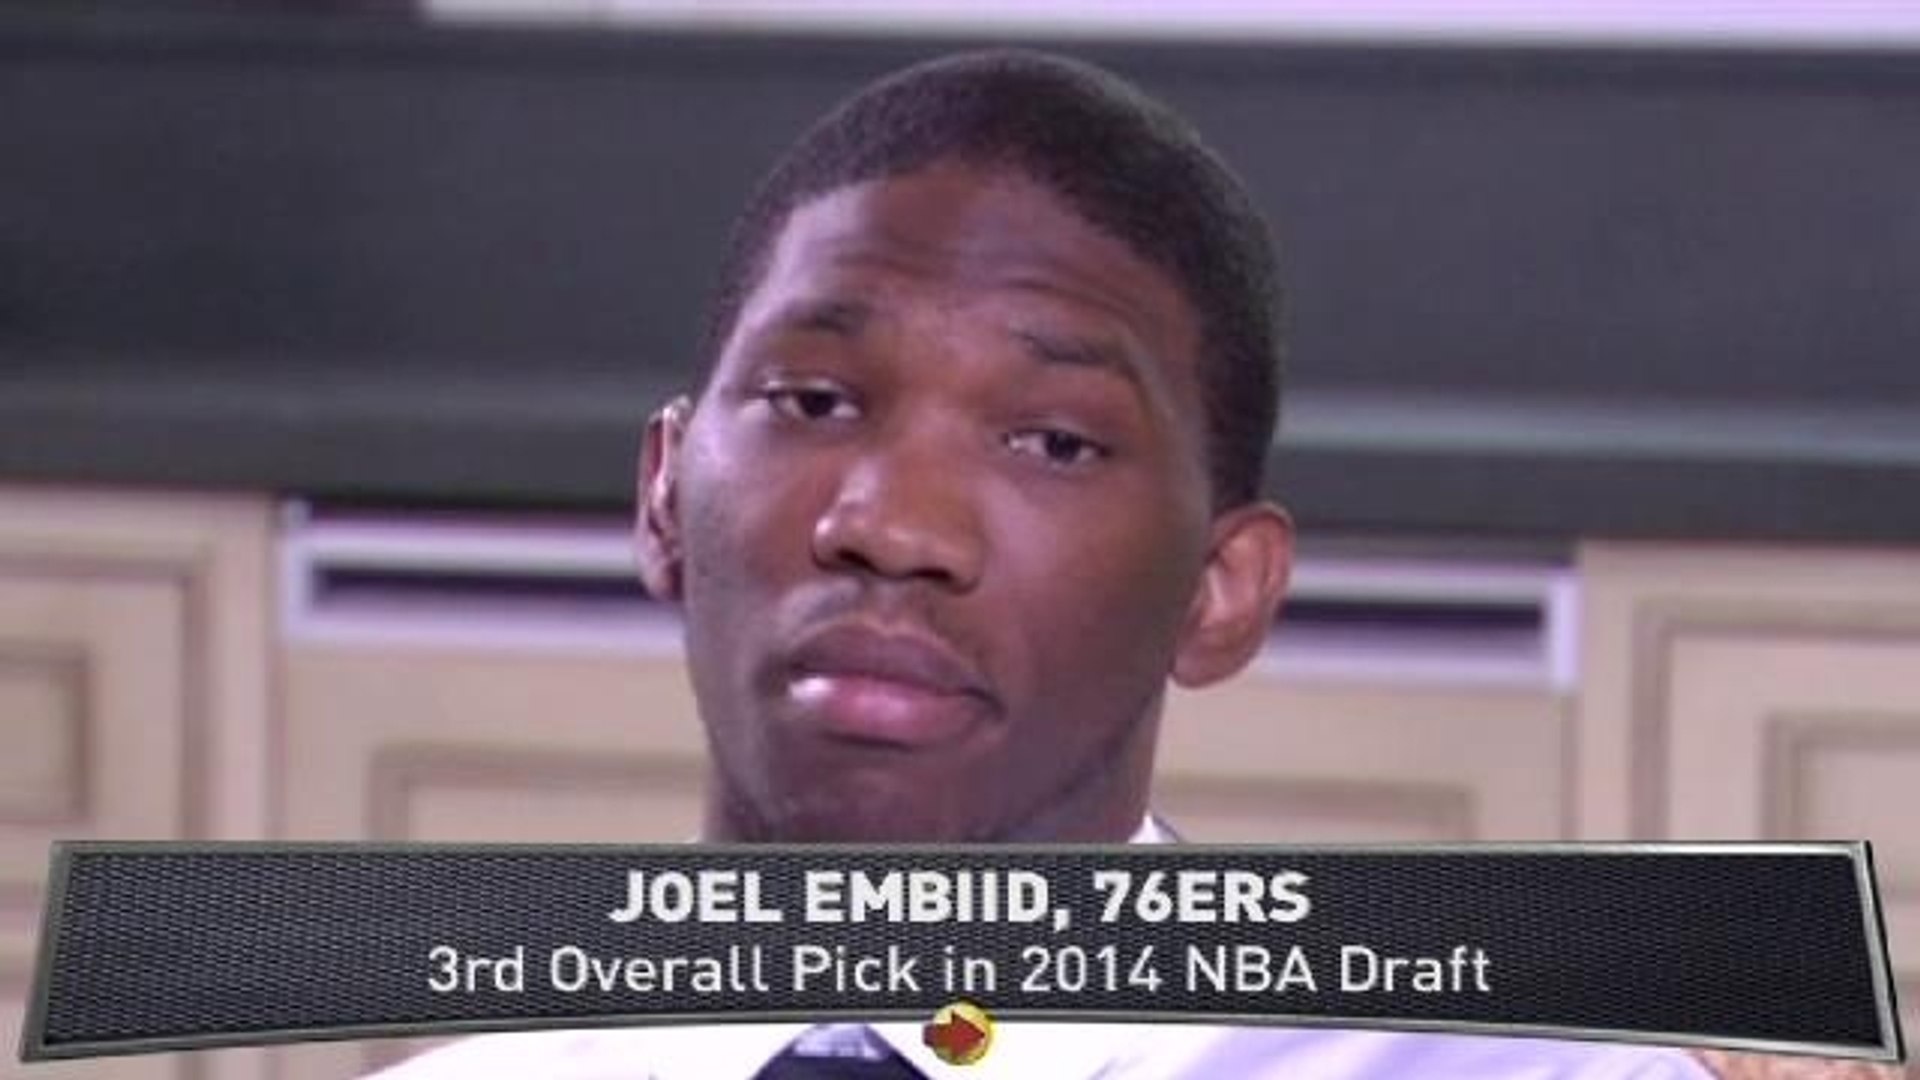 76ers take Kansas center Joel Embiid with 3rd pick in the NBA draft